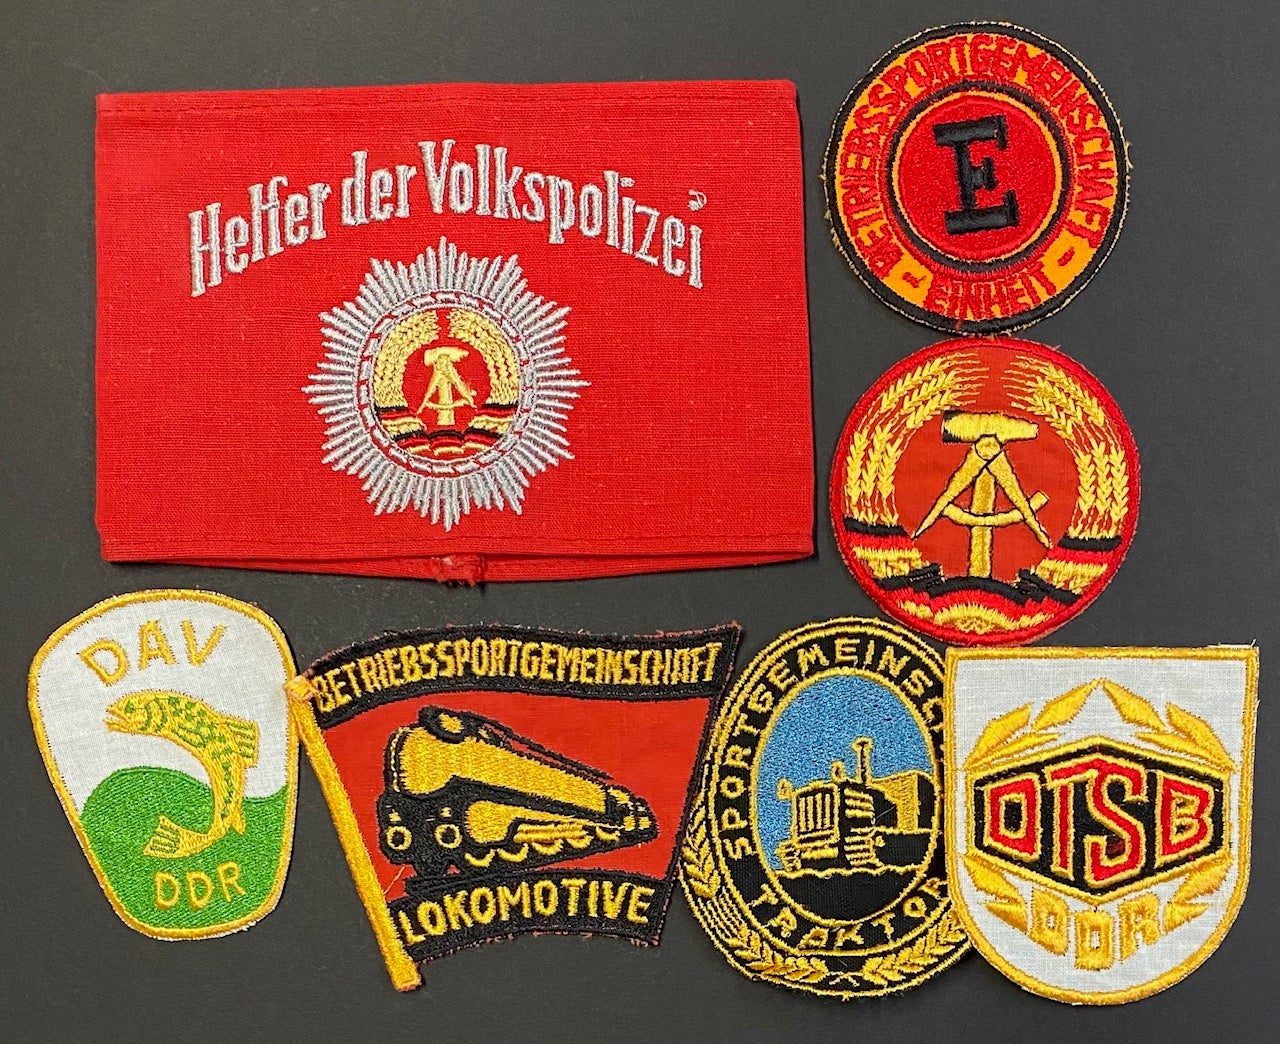 East of armband helper, for police der six various civilian an German volkspolizei together with patches sorts Helfer